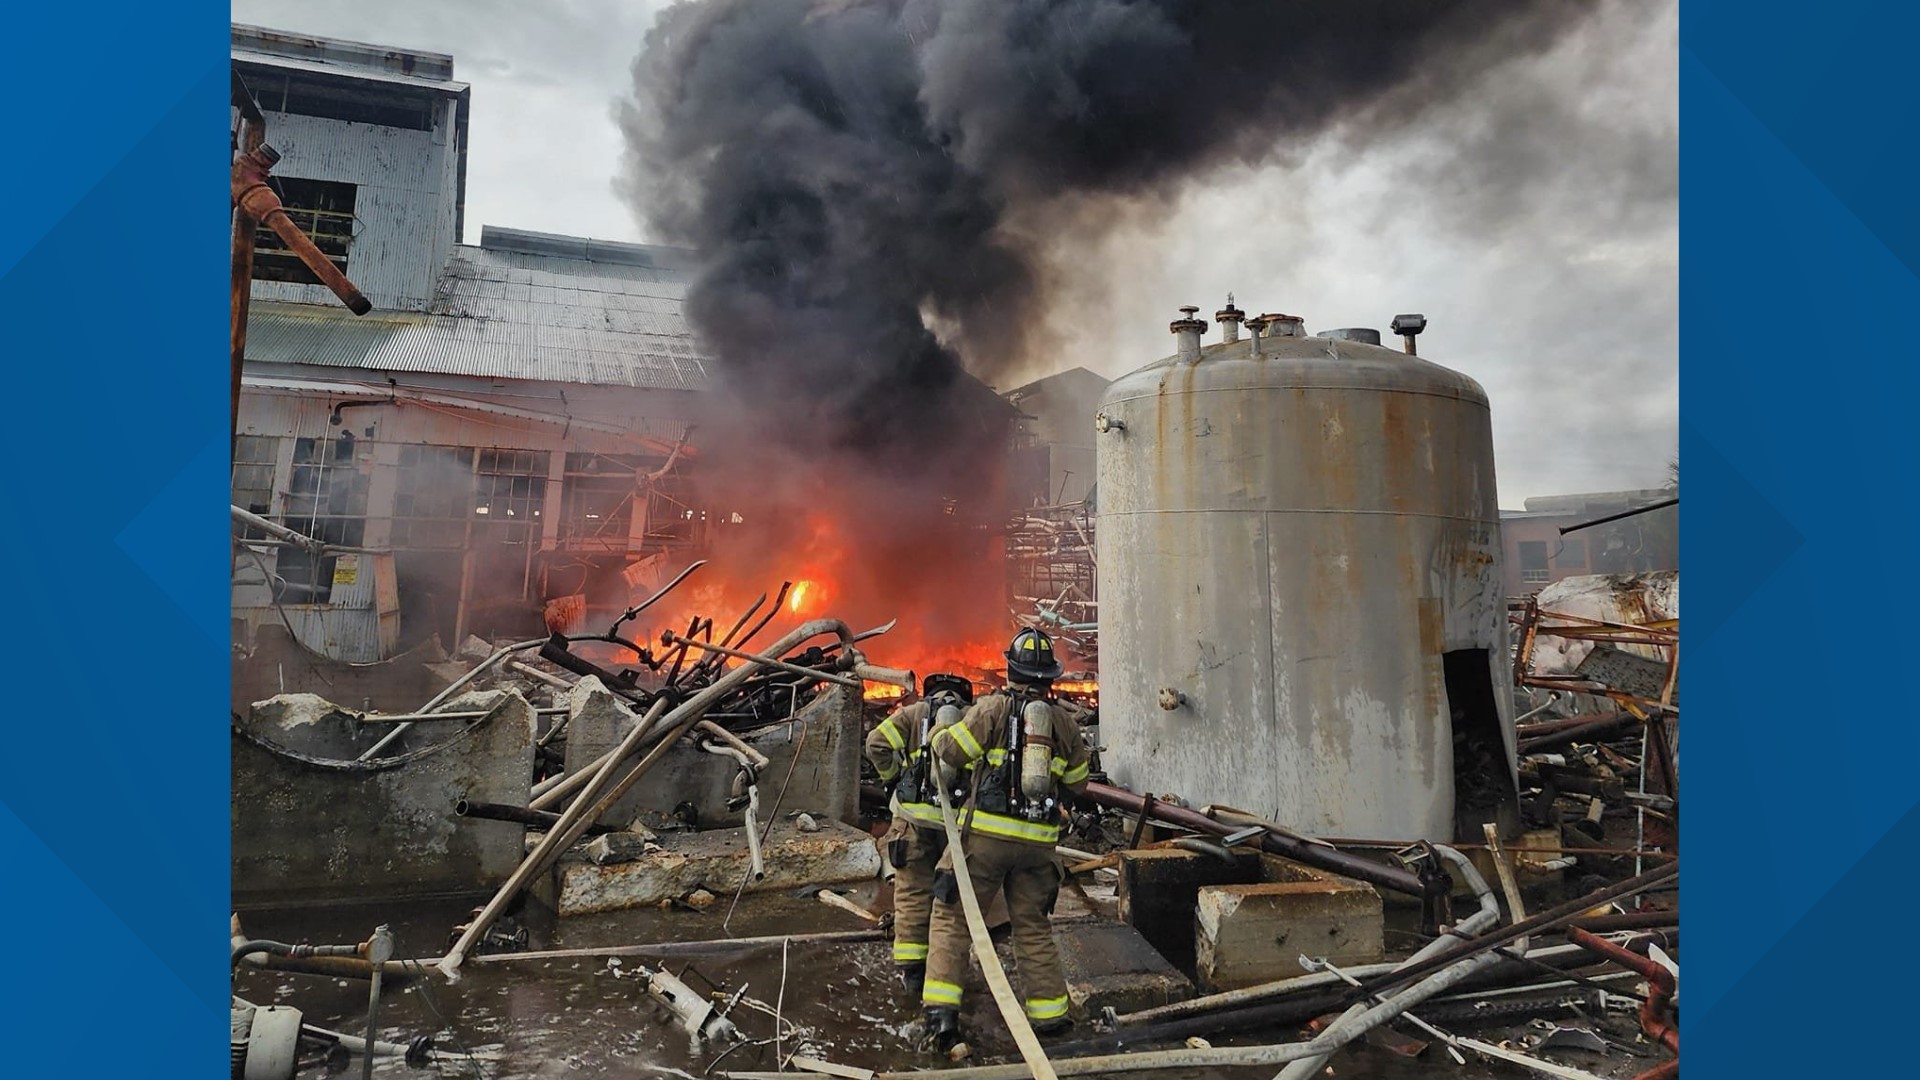 First responders initially thought the fire was started by a lightning strike that hit small containers of resin, though the official cause of the fire is unclear.